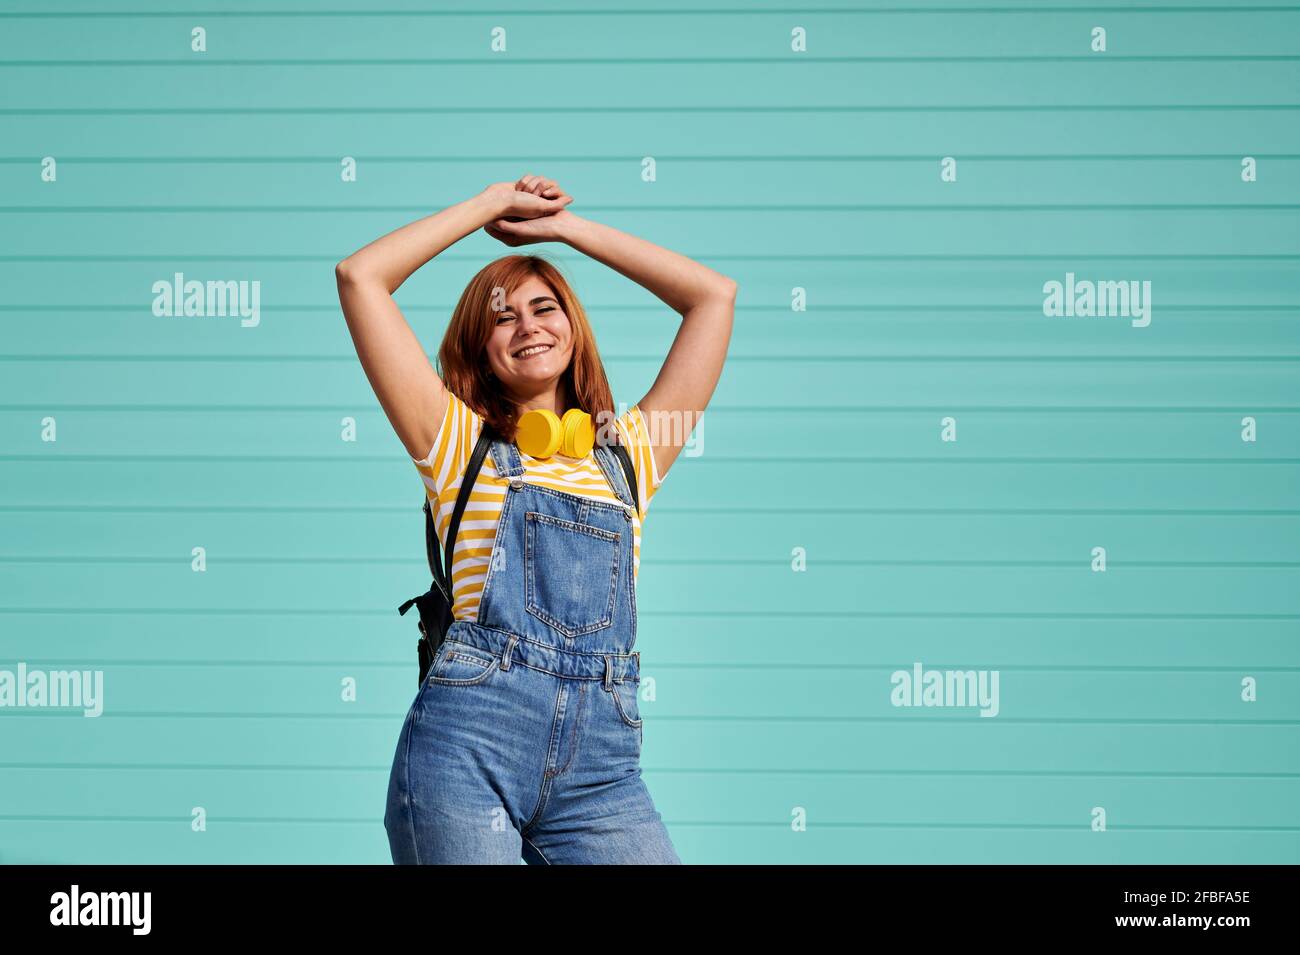 Smiling woman dancing in front of turquoise blue wall Stock Photo